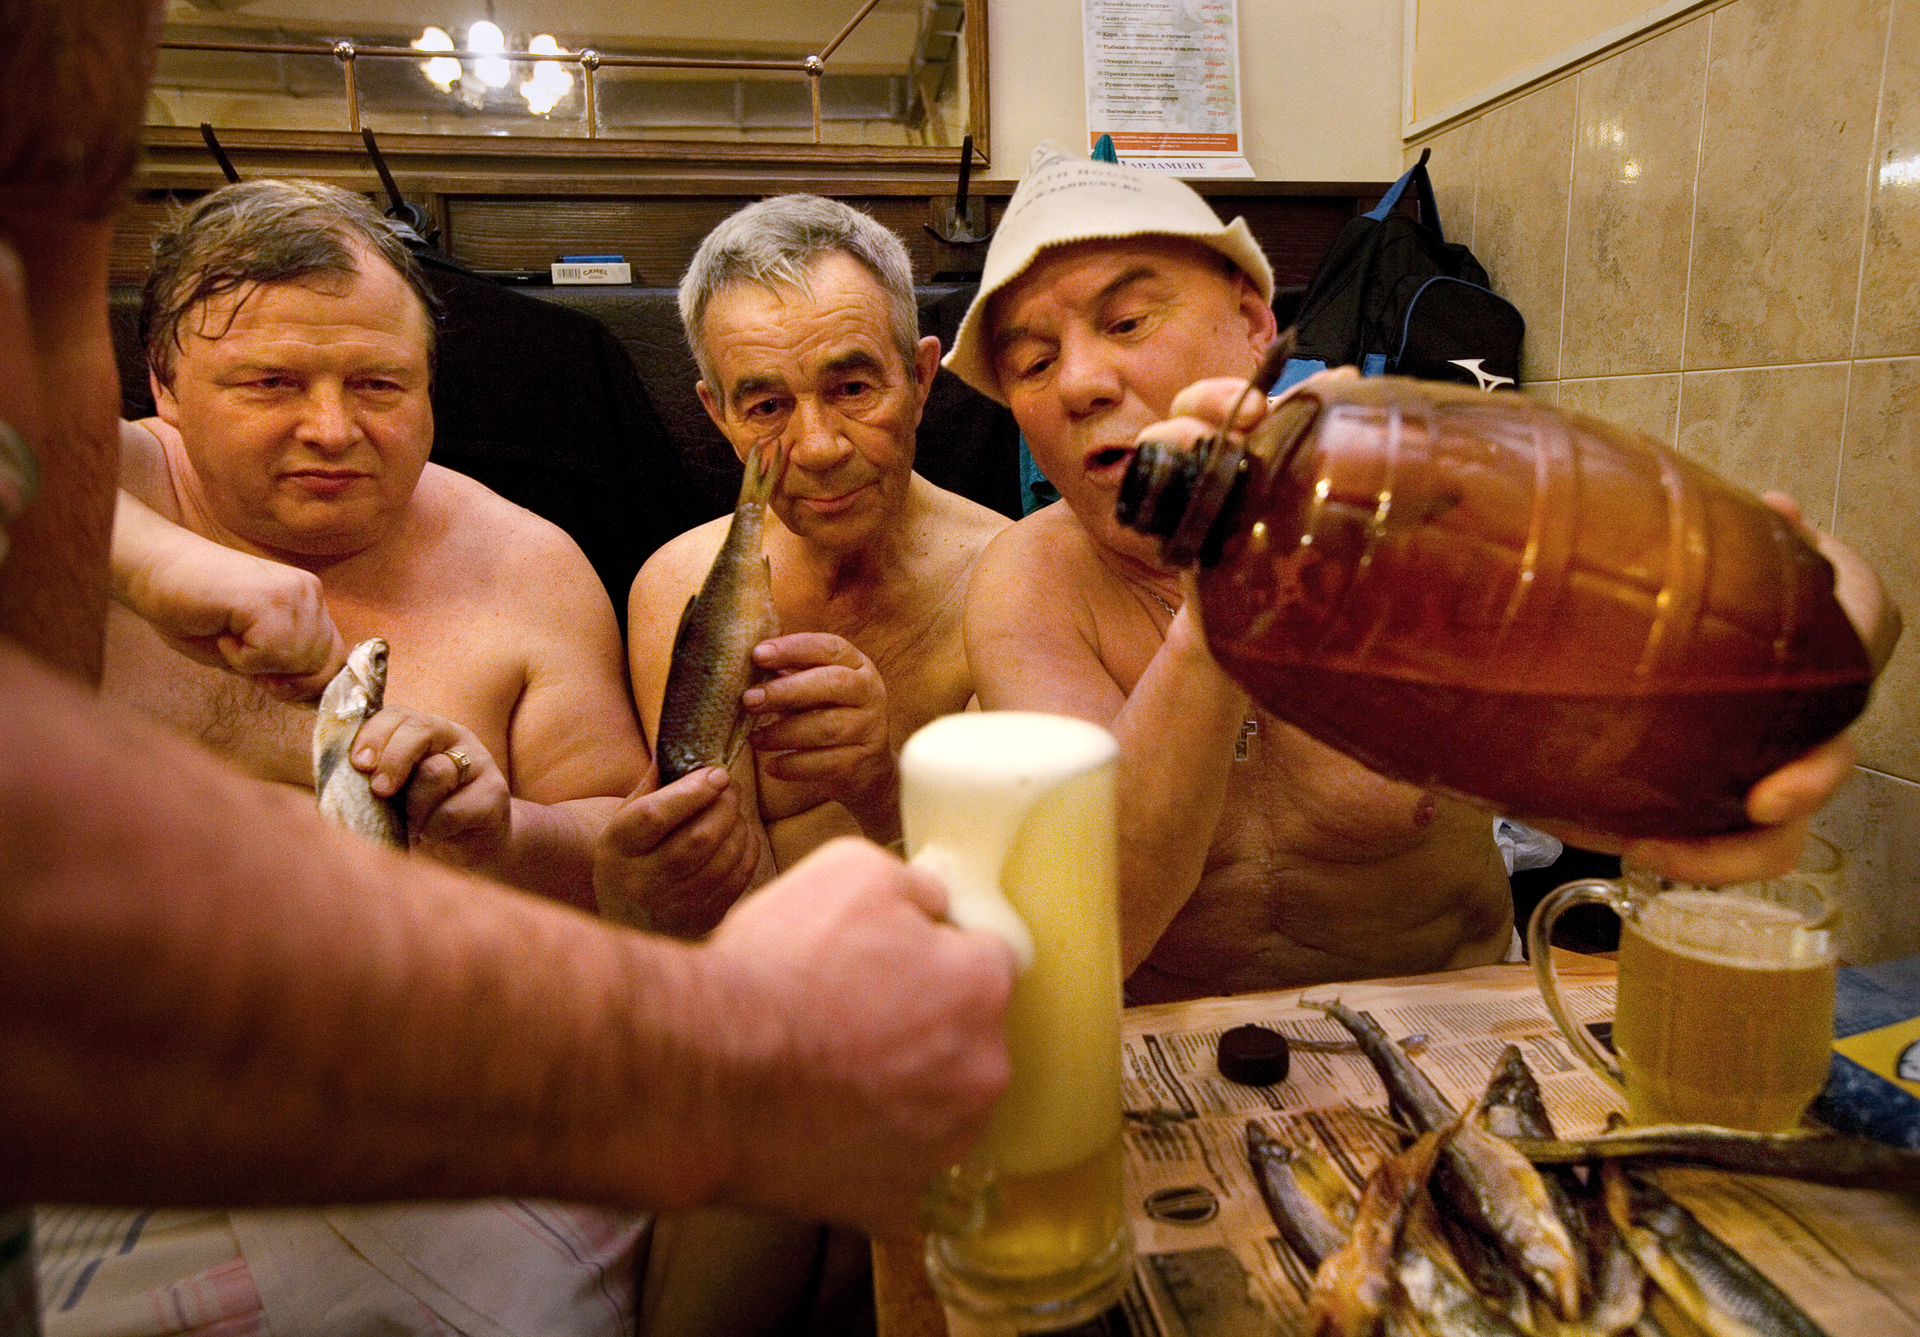  7:30PM - Friends Yevgeny, Anatoly, and Viktor polish off an evening with fistfuls of beer and smoked fish at the 200-year-old Sanduny baths, a traditional gathering place for the workaday crowd. 